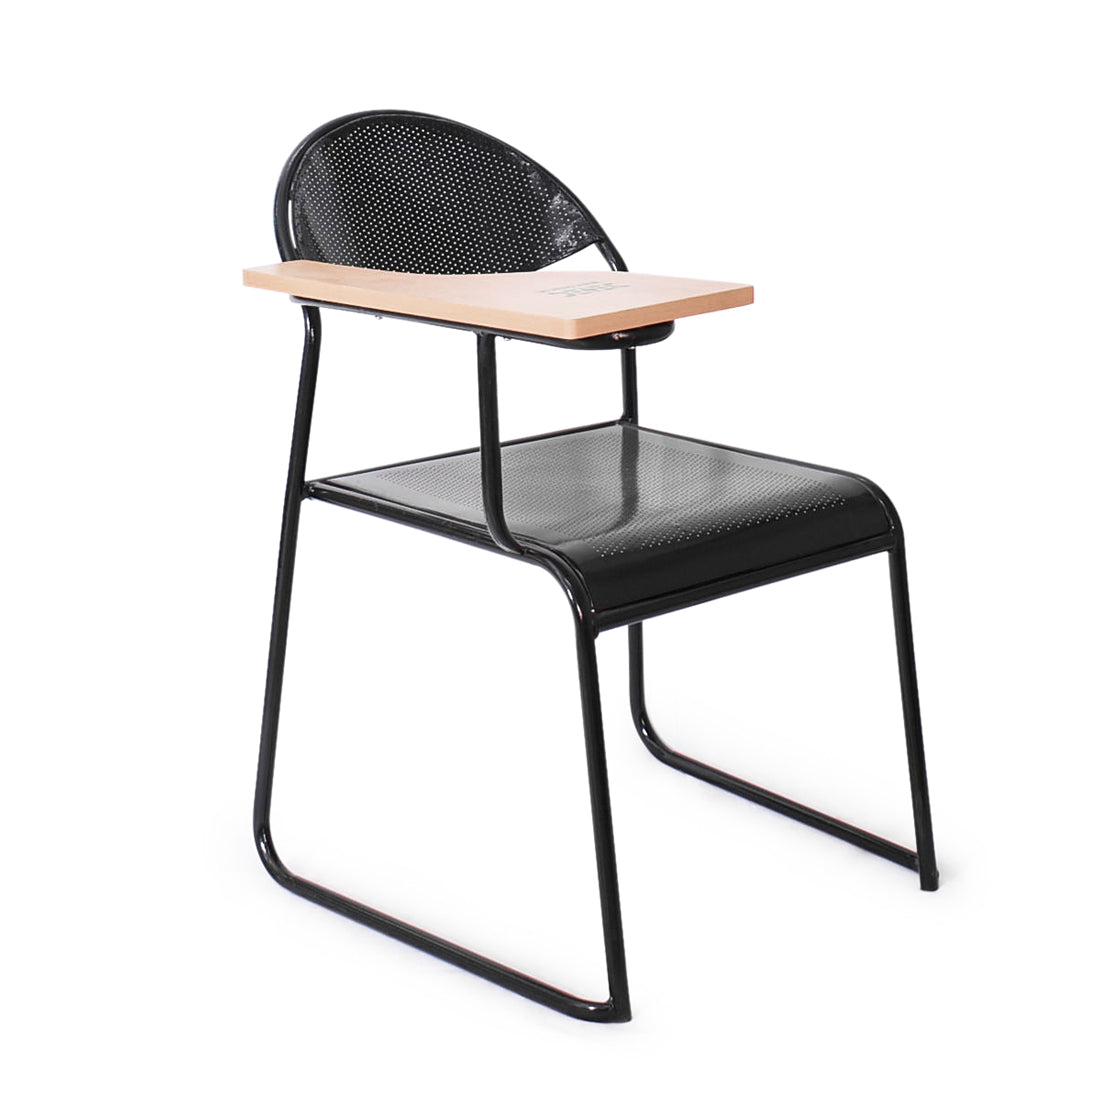 Classroom & Study Chair with Fixed Writing Pad